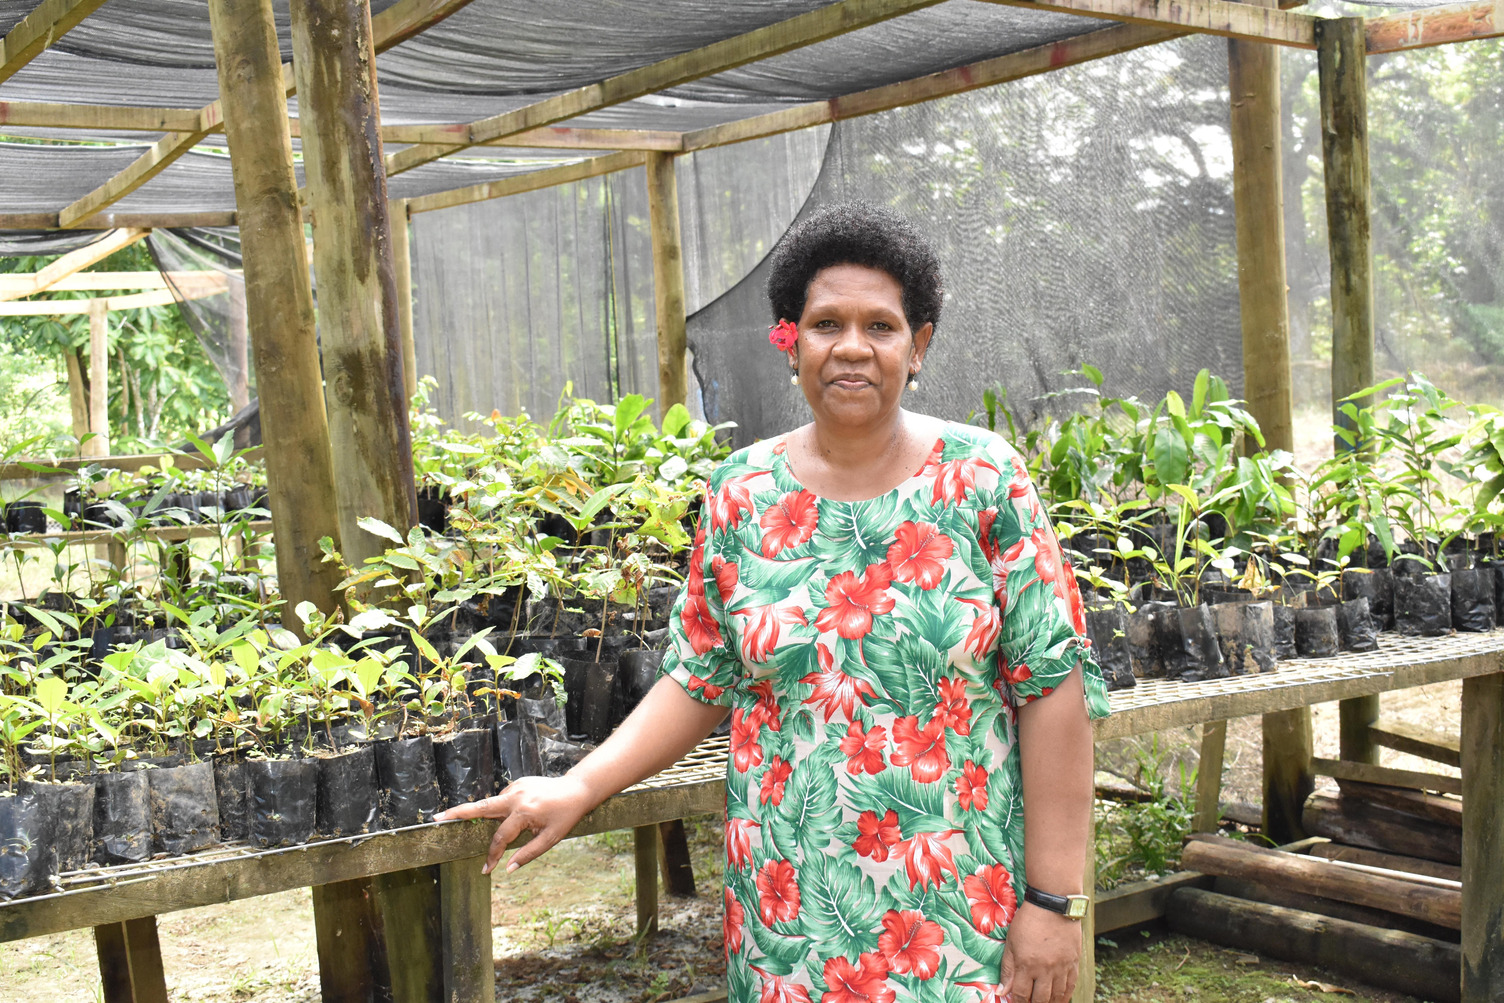  The Nadroumai Women's Club Mrs Amele Duguivalu says this project has not only saved their forests and river but brought the whole community together.